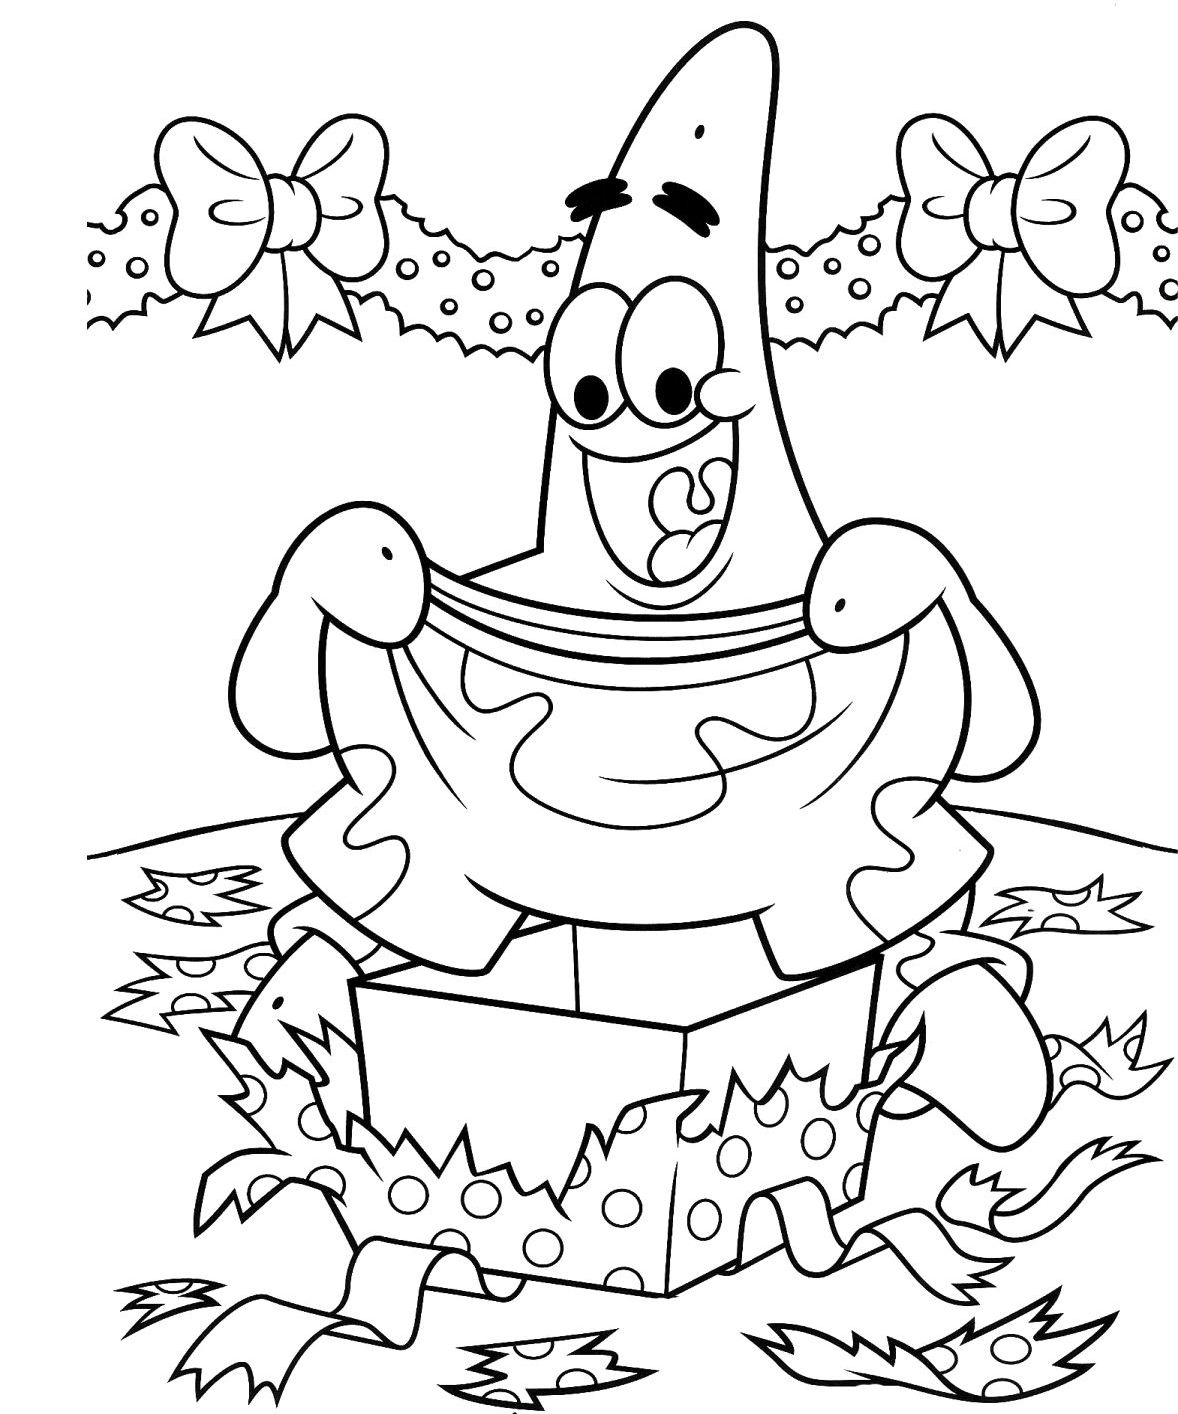 Spongebob Christmas Coloring Pages Coloring Home